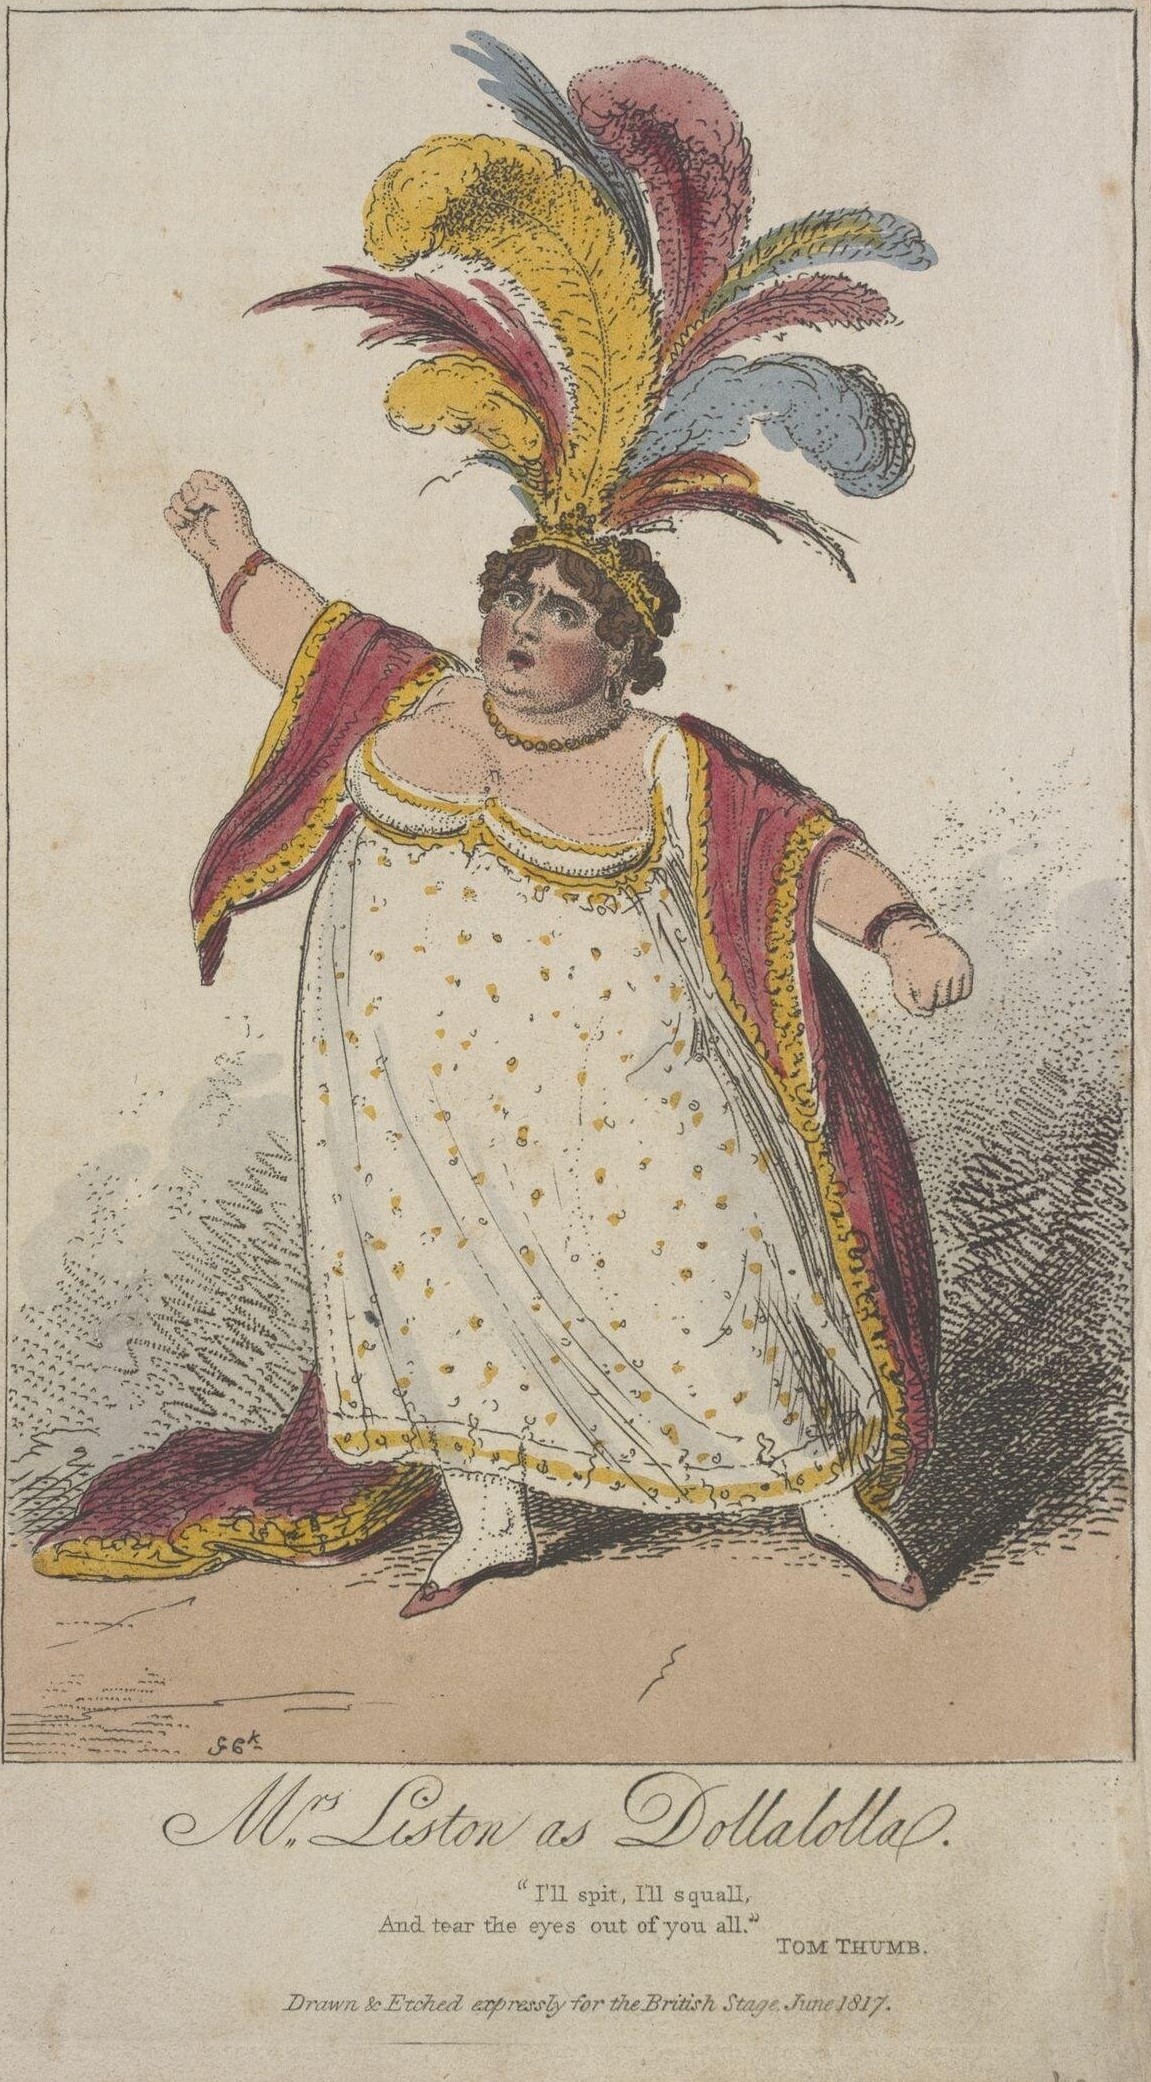 An image of a lady wearing a feather headdress with the caption "Mrs Liston as Dollalolla"